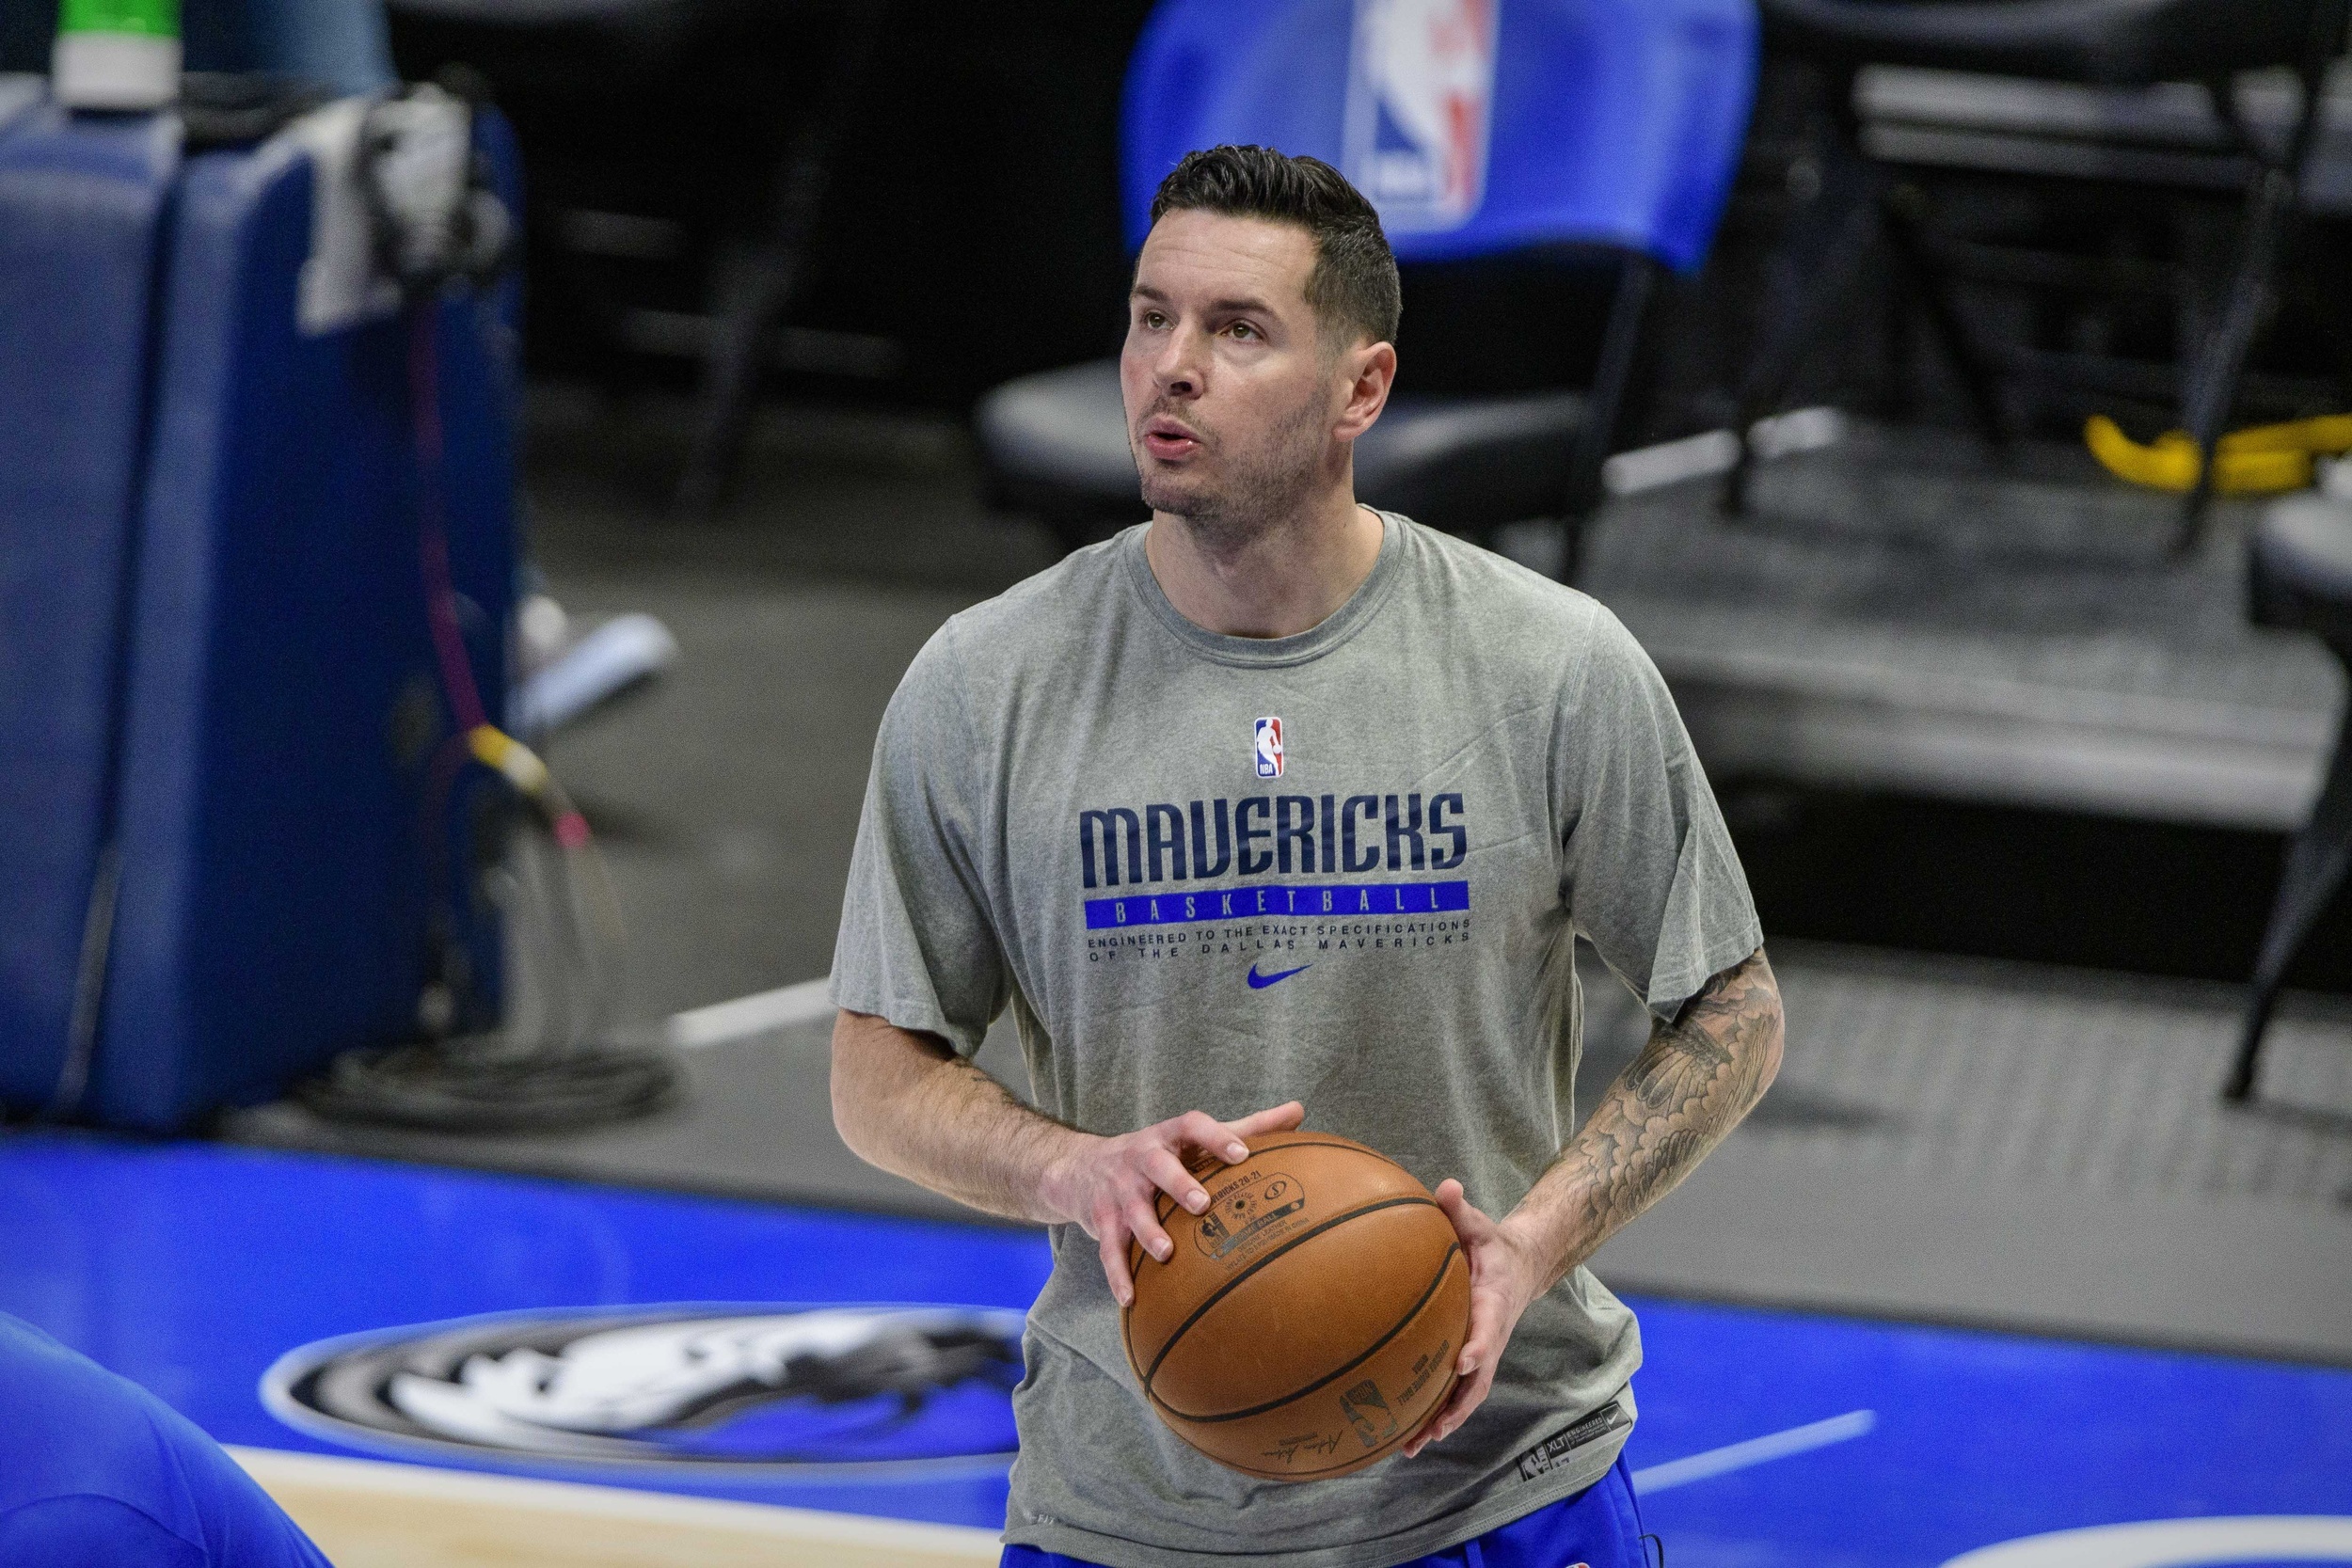 former sixth man of the year questions jj redick's coaching credentials